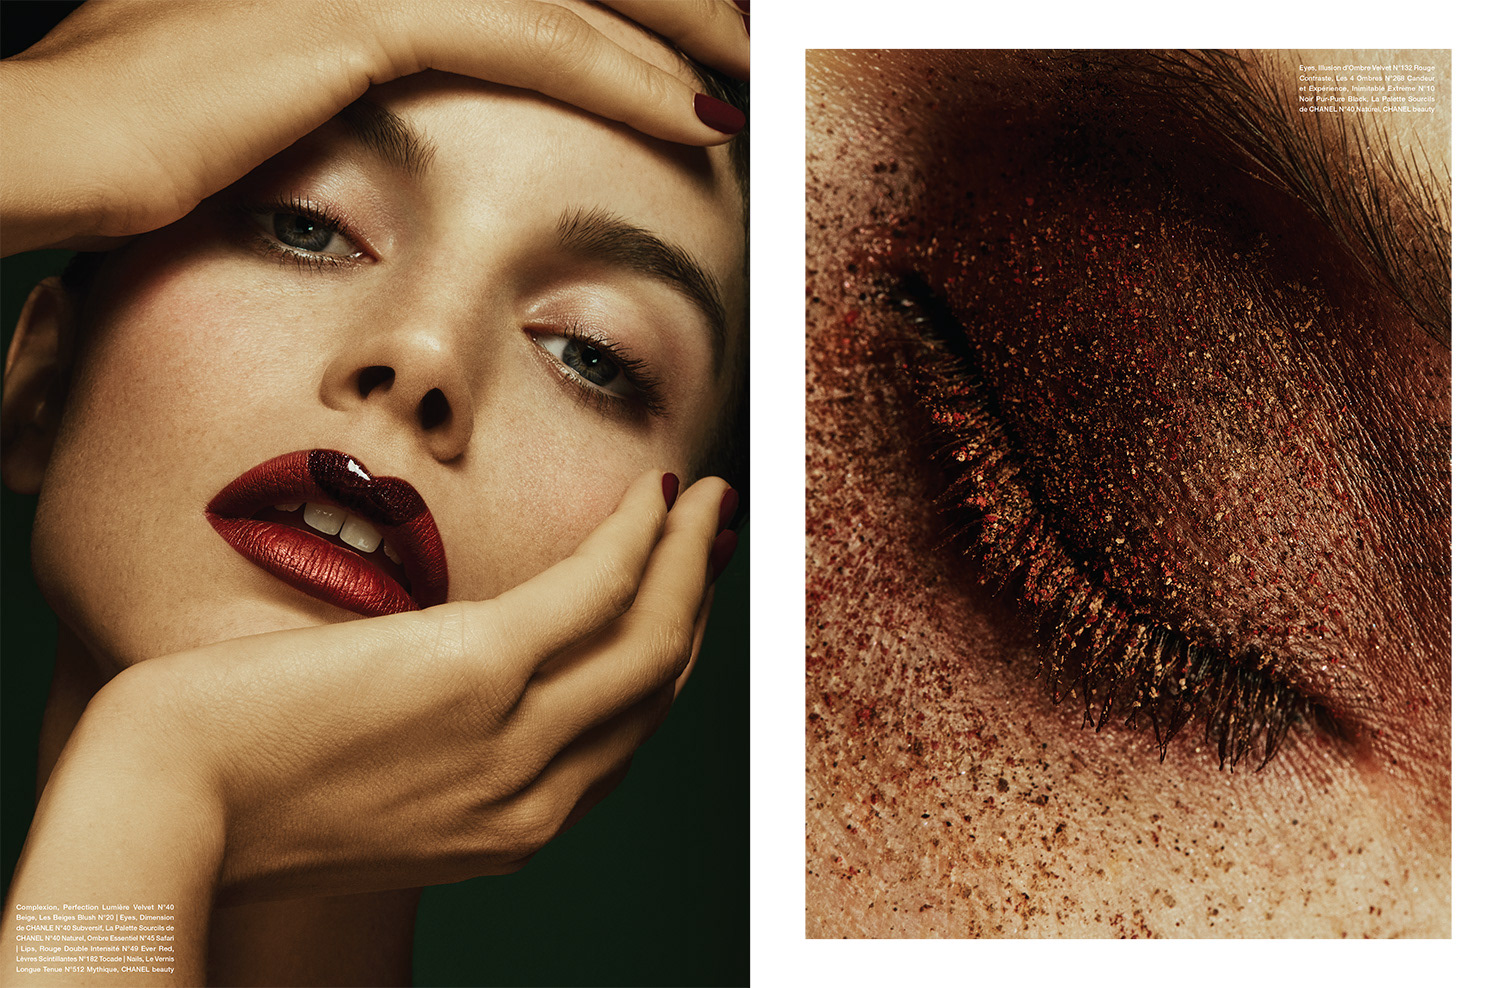 Remi & Kasia: Beauty photography - Chanel special